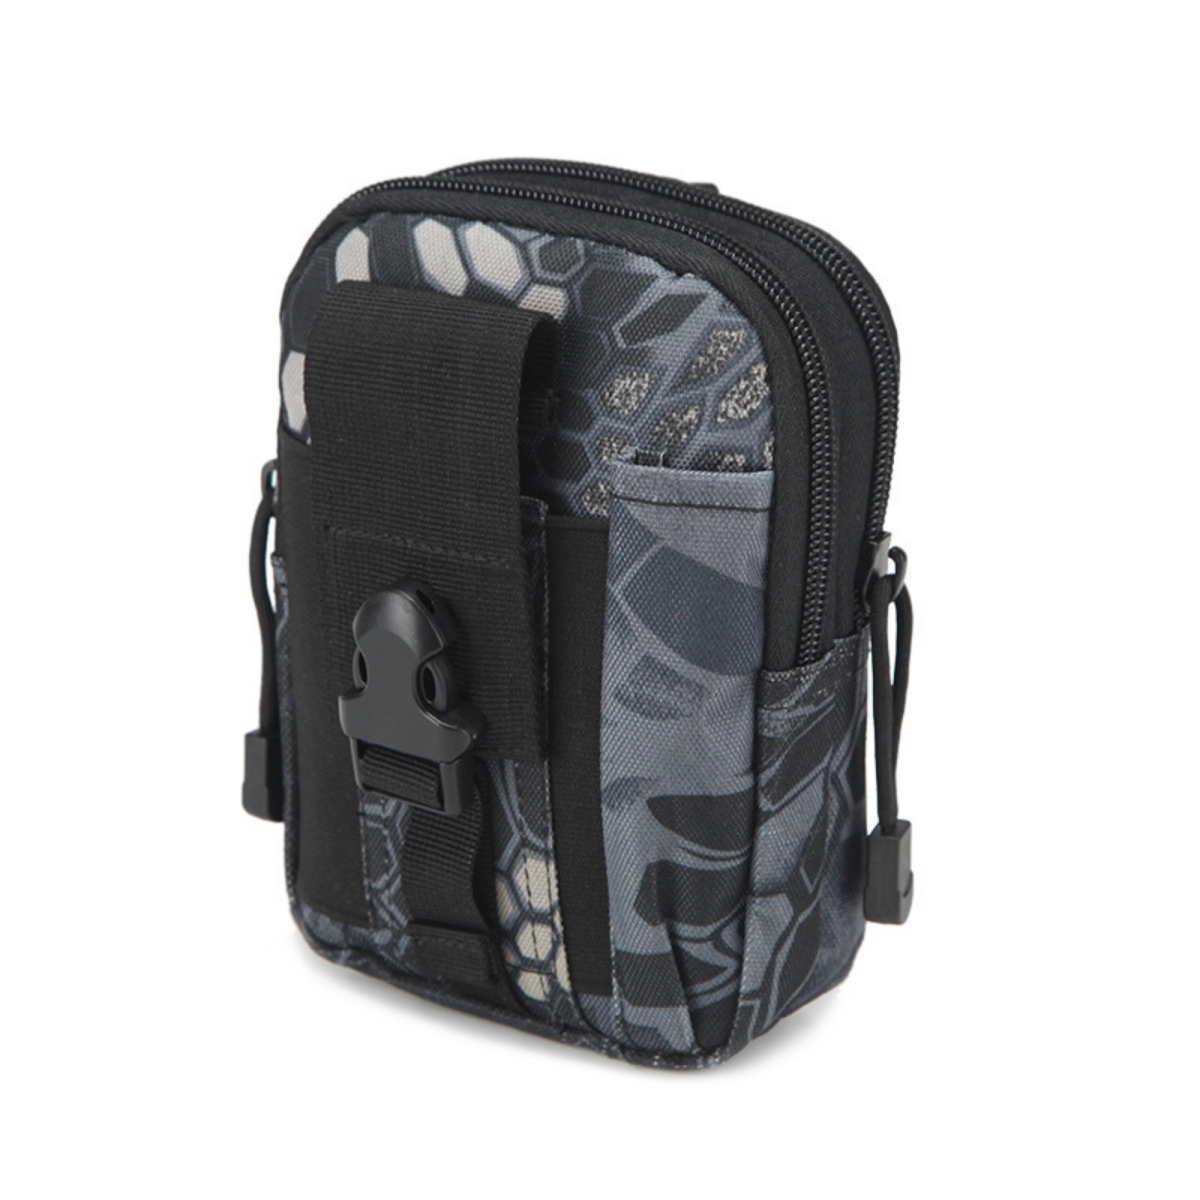 Picture of JupiterGear JG-SLNGBAG2-PYTHON Tactical MOLLE Military Pouch Waist Bag for Hiking and Outdoor Activities (JG-SLNGBAG2-PYTHON) Python